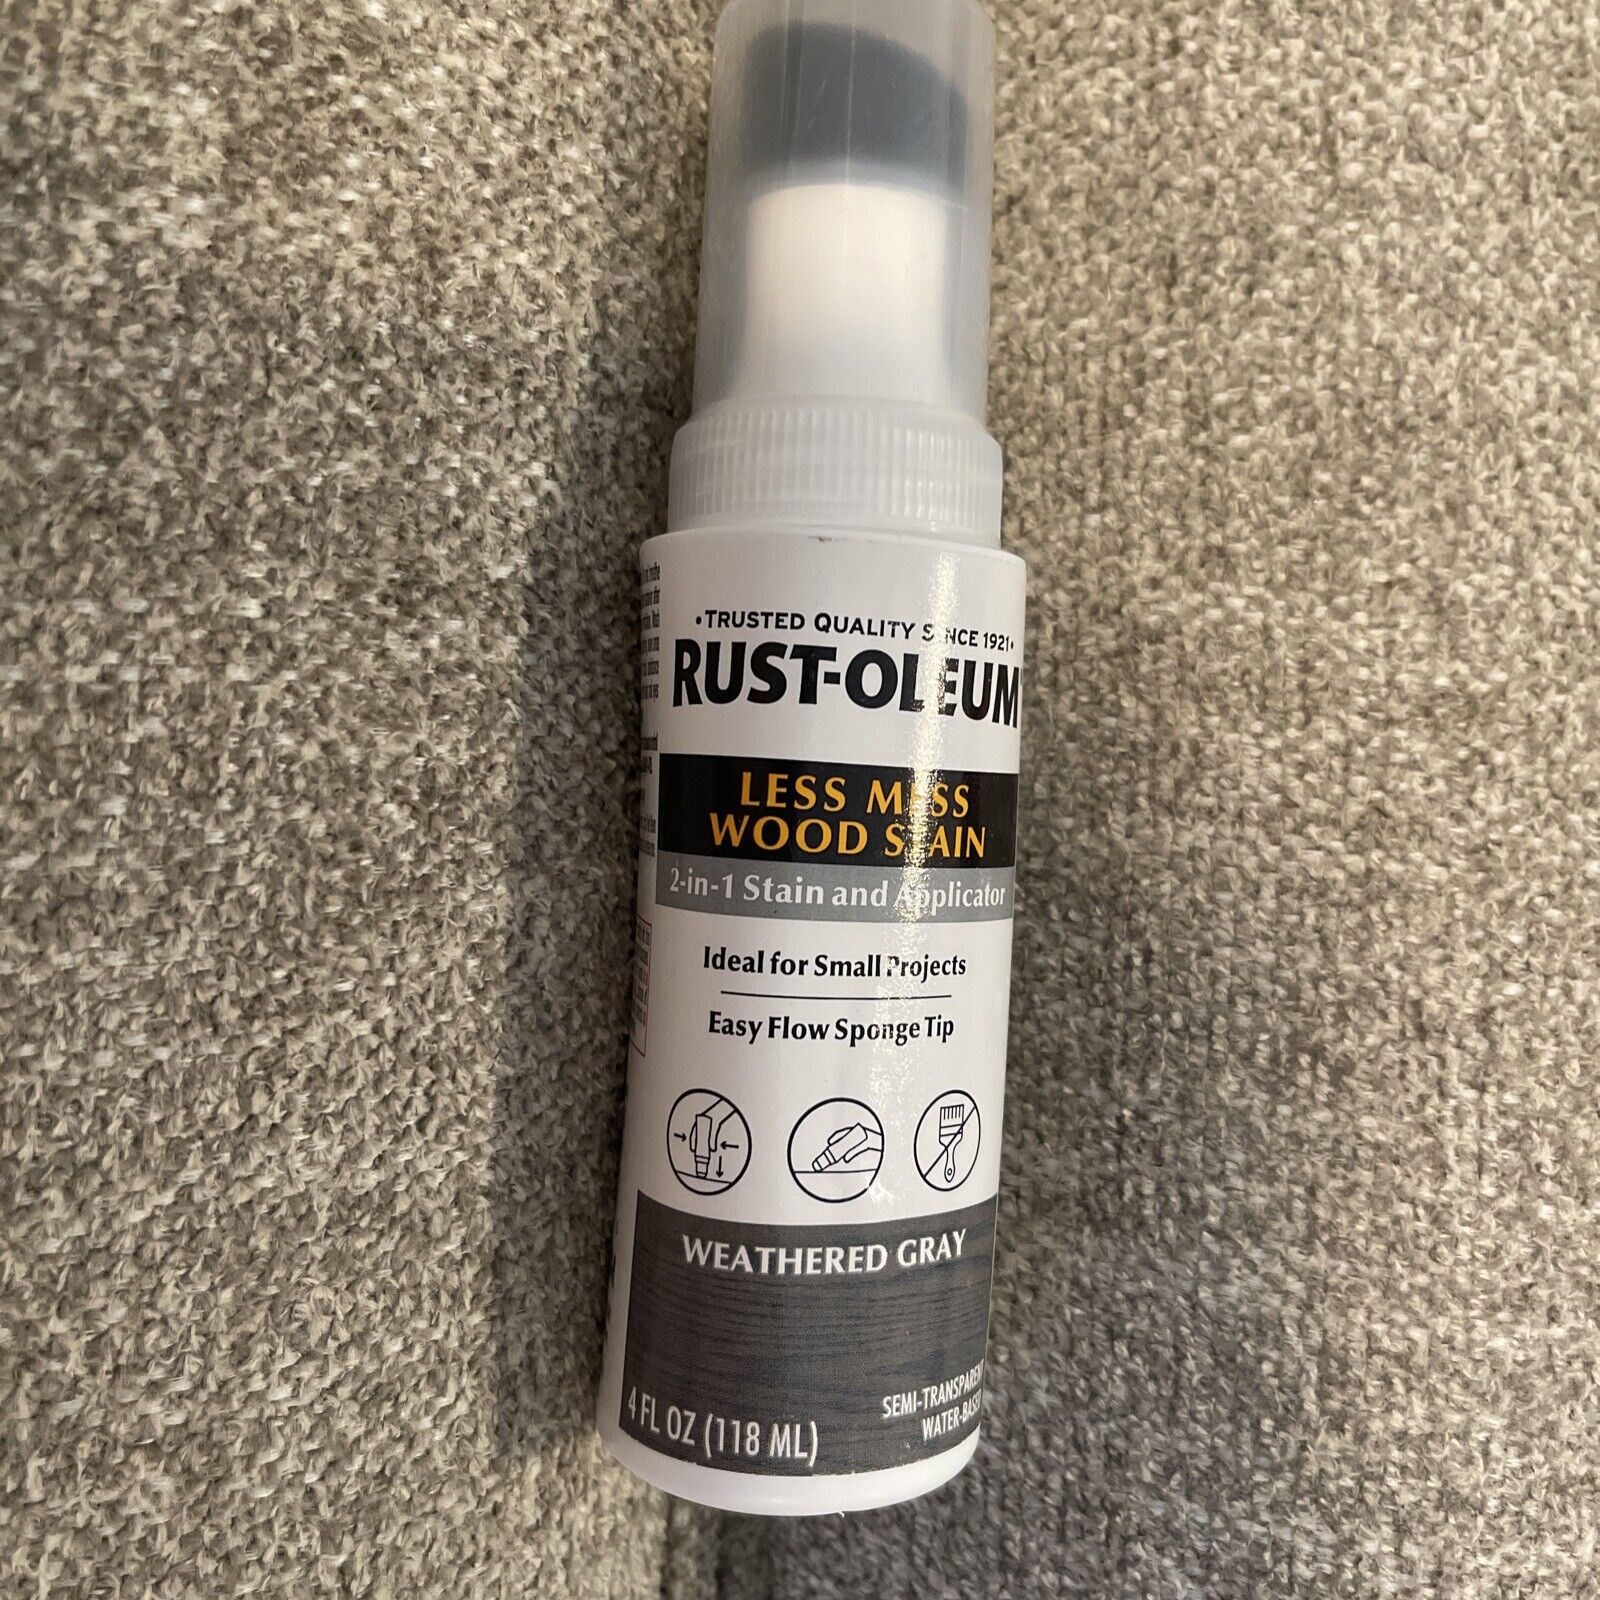 Rust-Oleum 2-in-1 Stain and Applicator Weathered Gray  4 Fl. Oz Sponge Tip